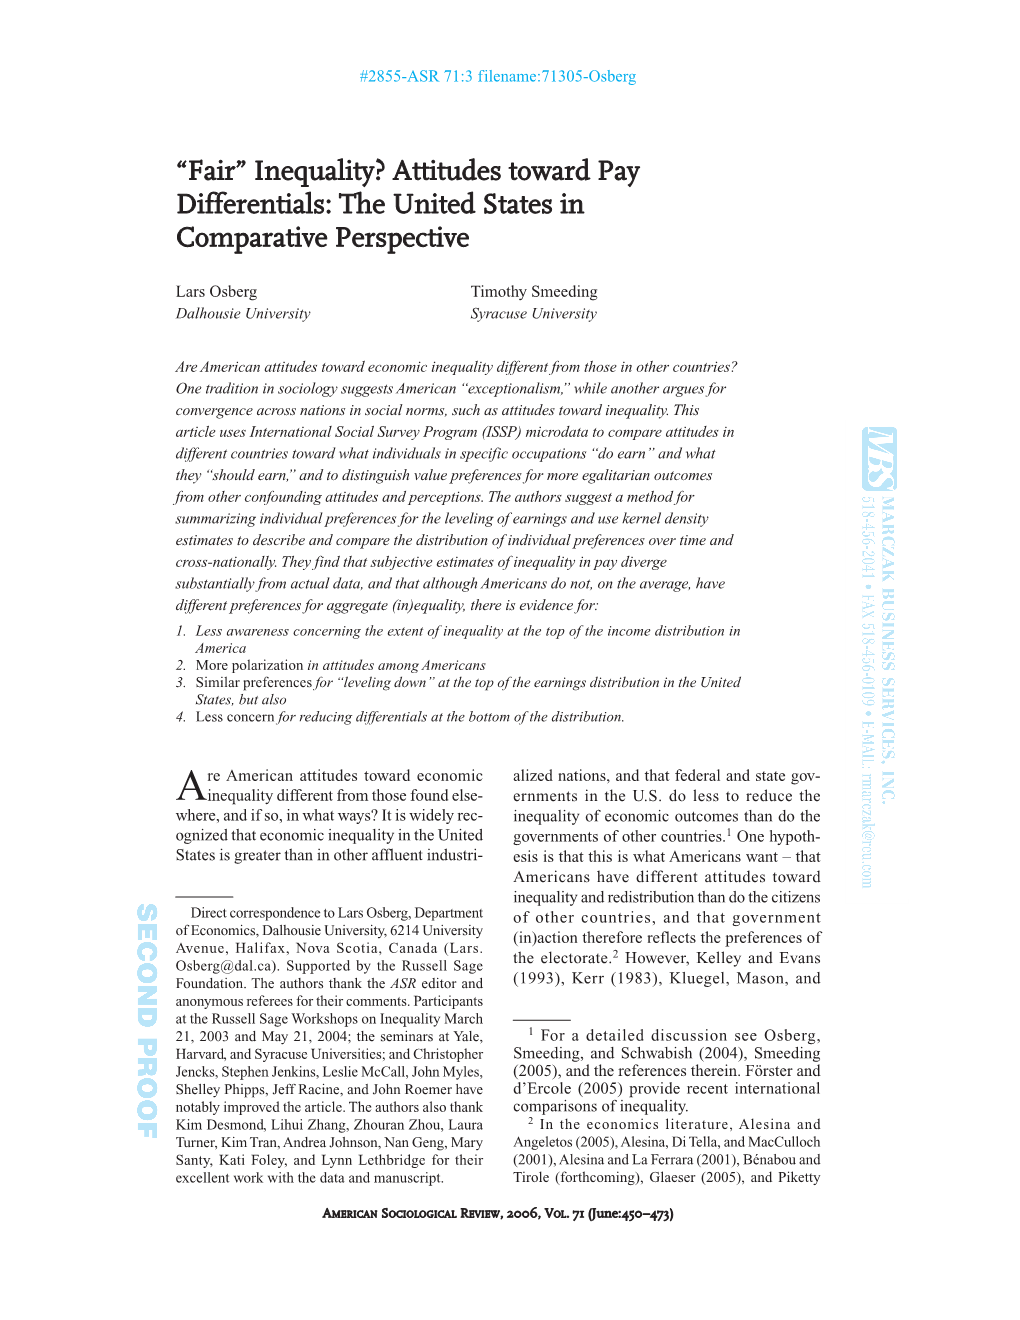 “Fair” Inequality? Attitudes Toward Pay Differentials: the United States in Comparative Perspective